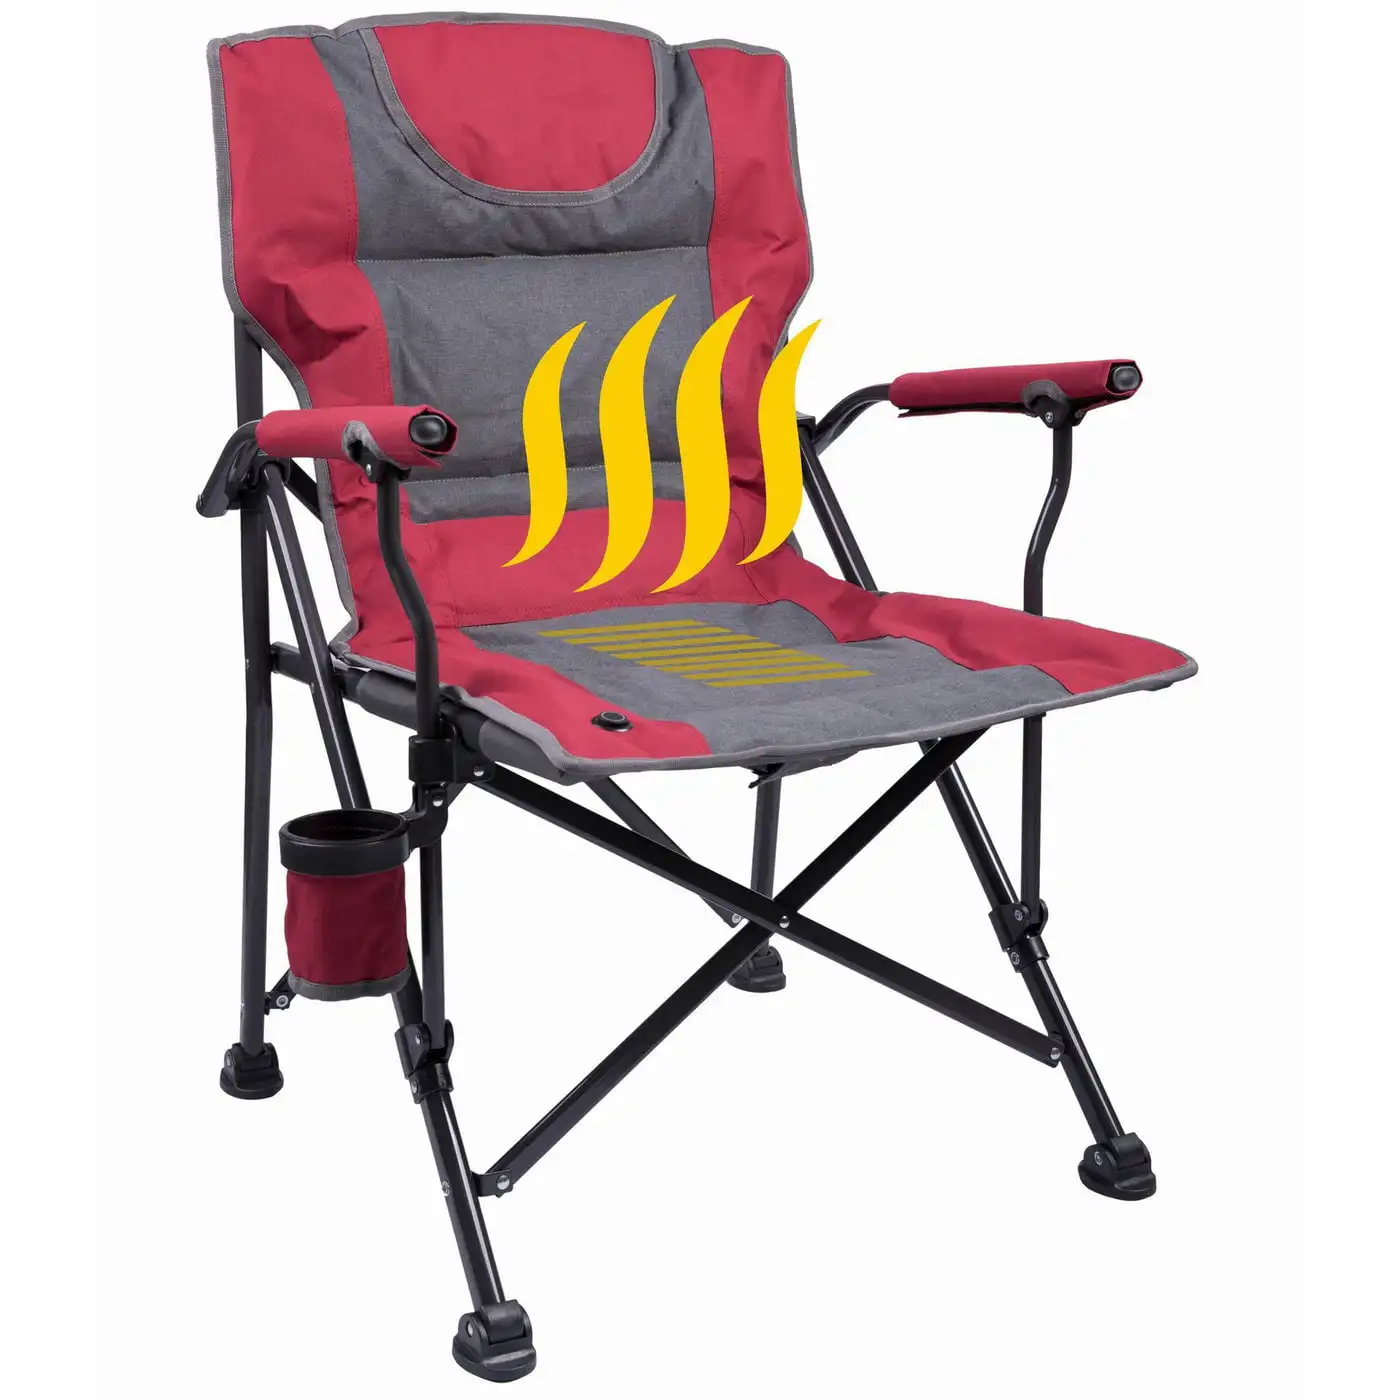 

Luxury Heated Portable Camp Chair - Red/Grey - Great for Camping, Sports and the Beach